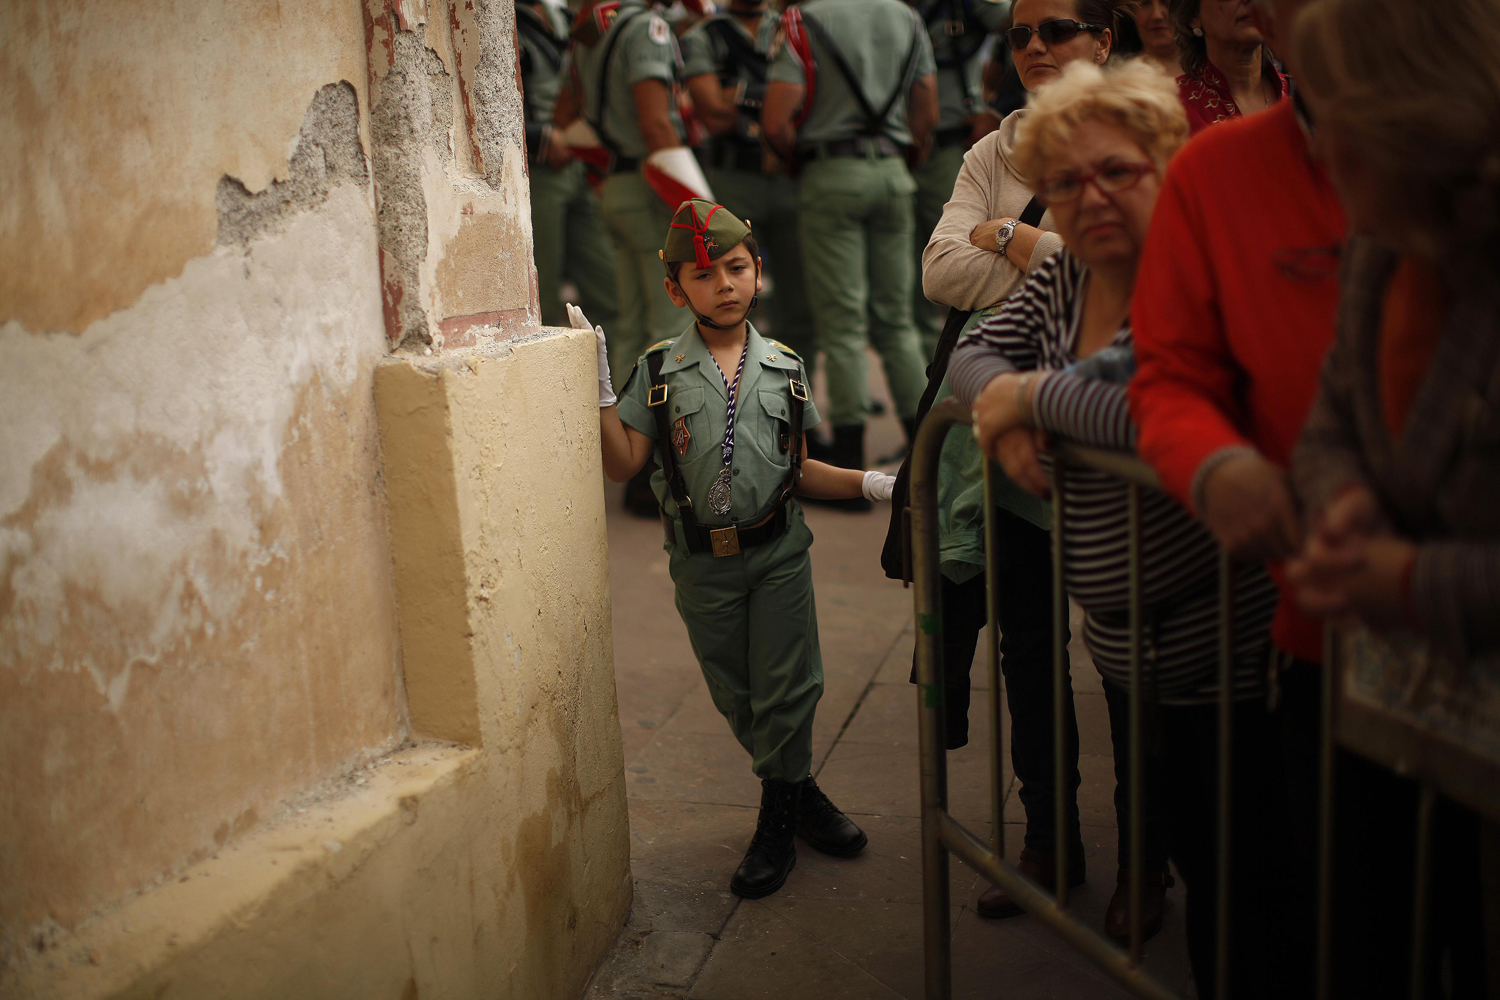 March 28, 2013. Guille, 6, dressed as a Spanish legionnaire, looks on during a ceremony where Spanish legionnaires carry a statue of the Christ of Mena before taking part in the Mena brotherhood procession in Malaga, southern Spain.